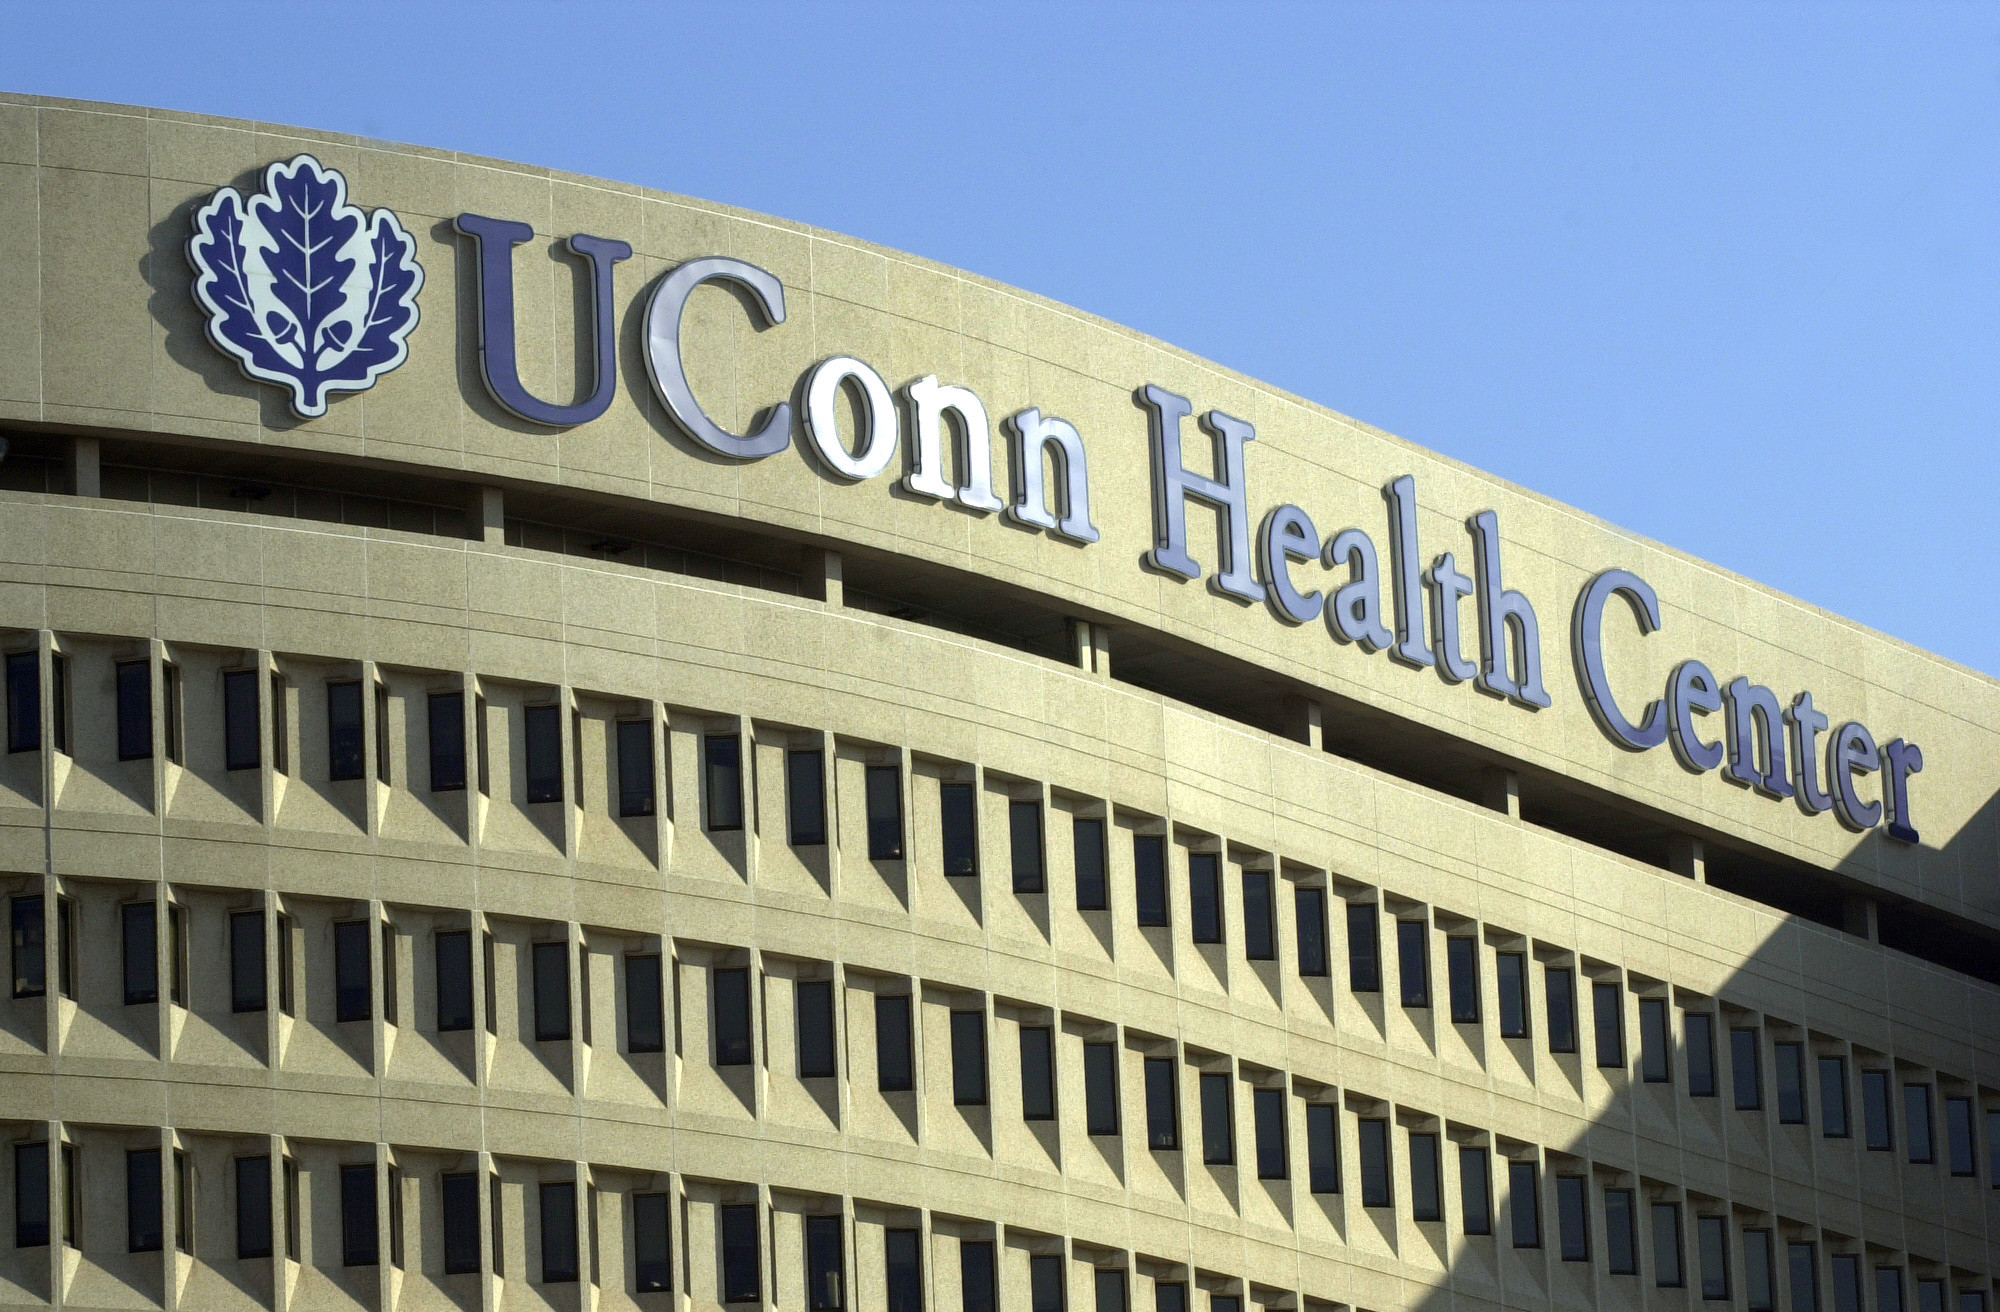 UConn Health Center owes $184,984 to US Government for overbilling ...